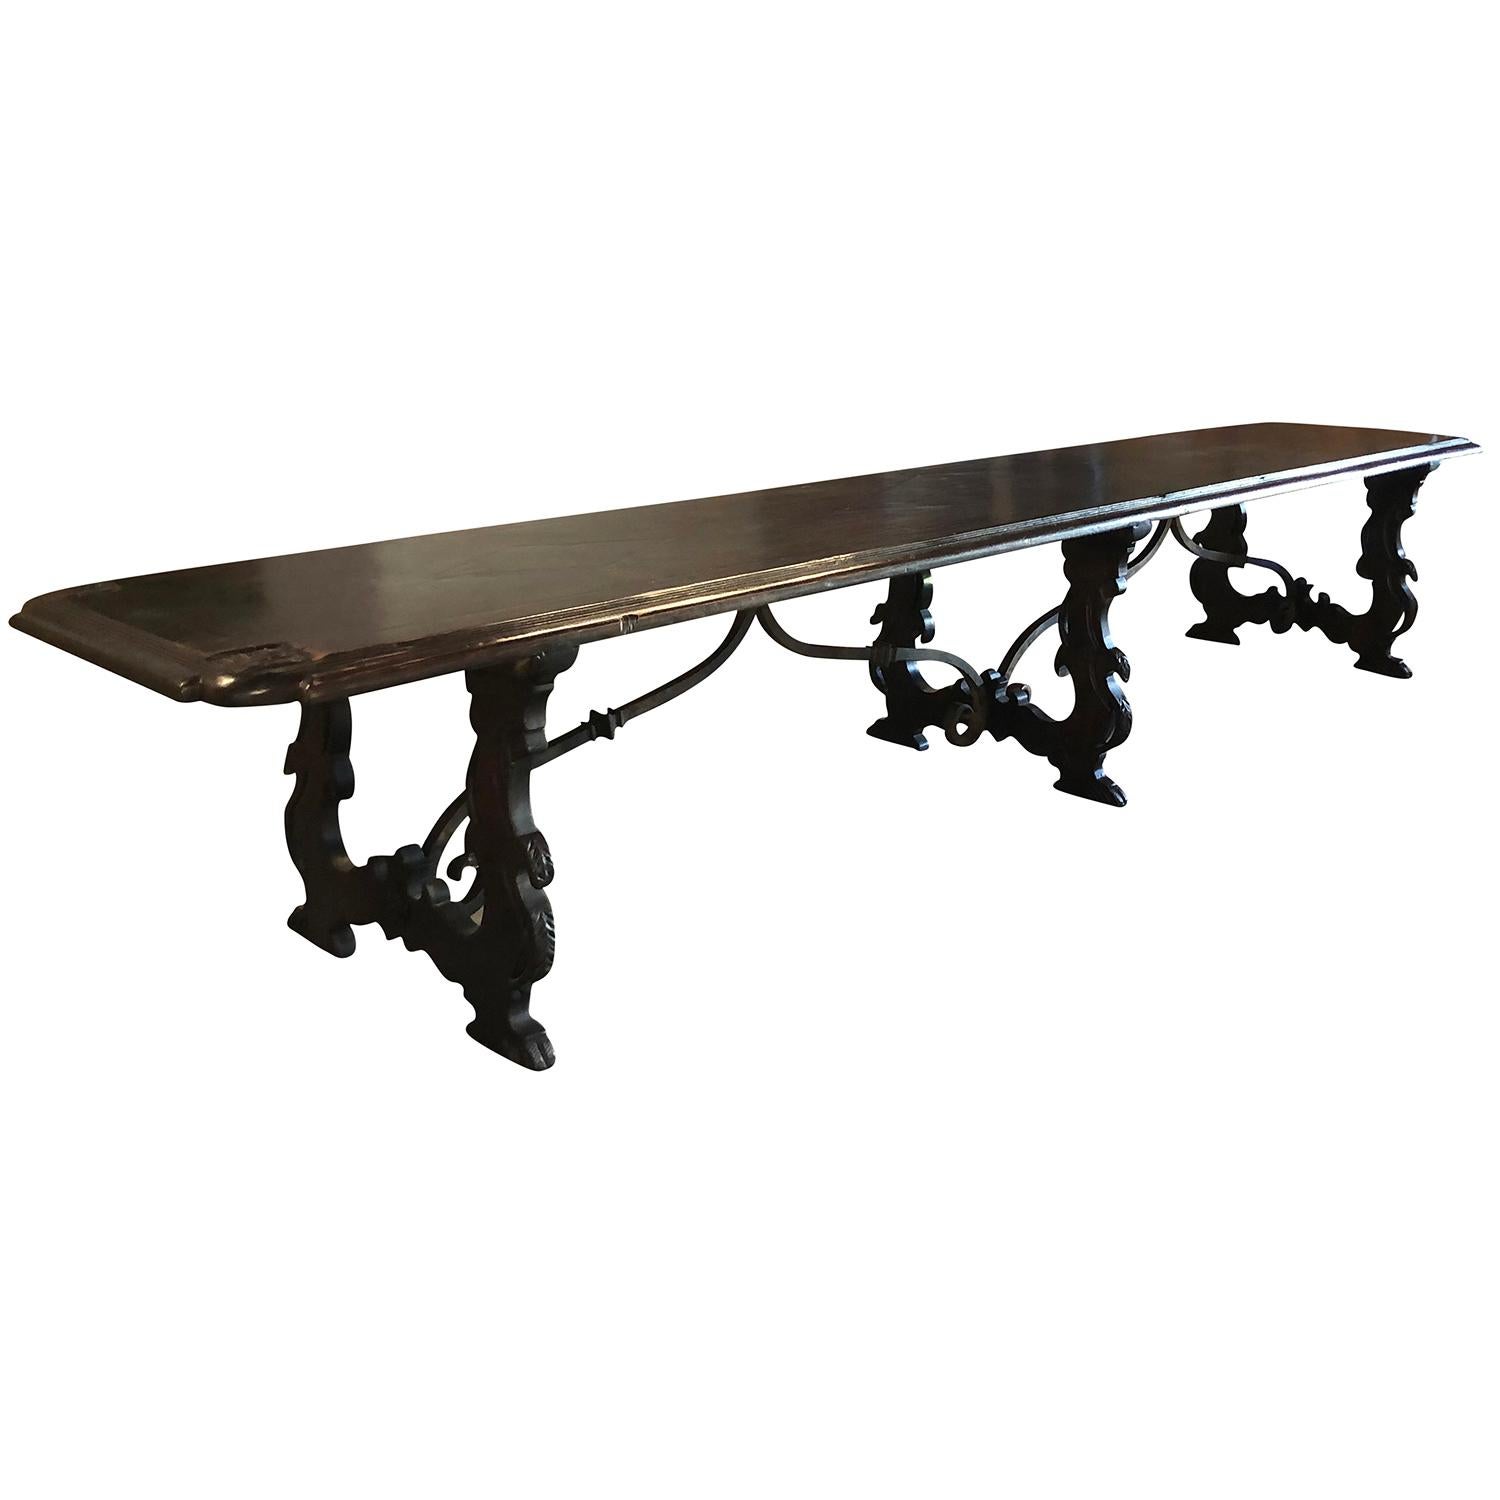 An important and oversized Tuscan Refectory table. The table top was carved by hand in a single dark Walnut plank and is adorned with carved Fleur de Lys on each corner. The top is raised on shaped trestle ends and is joined by an iron trestle base.